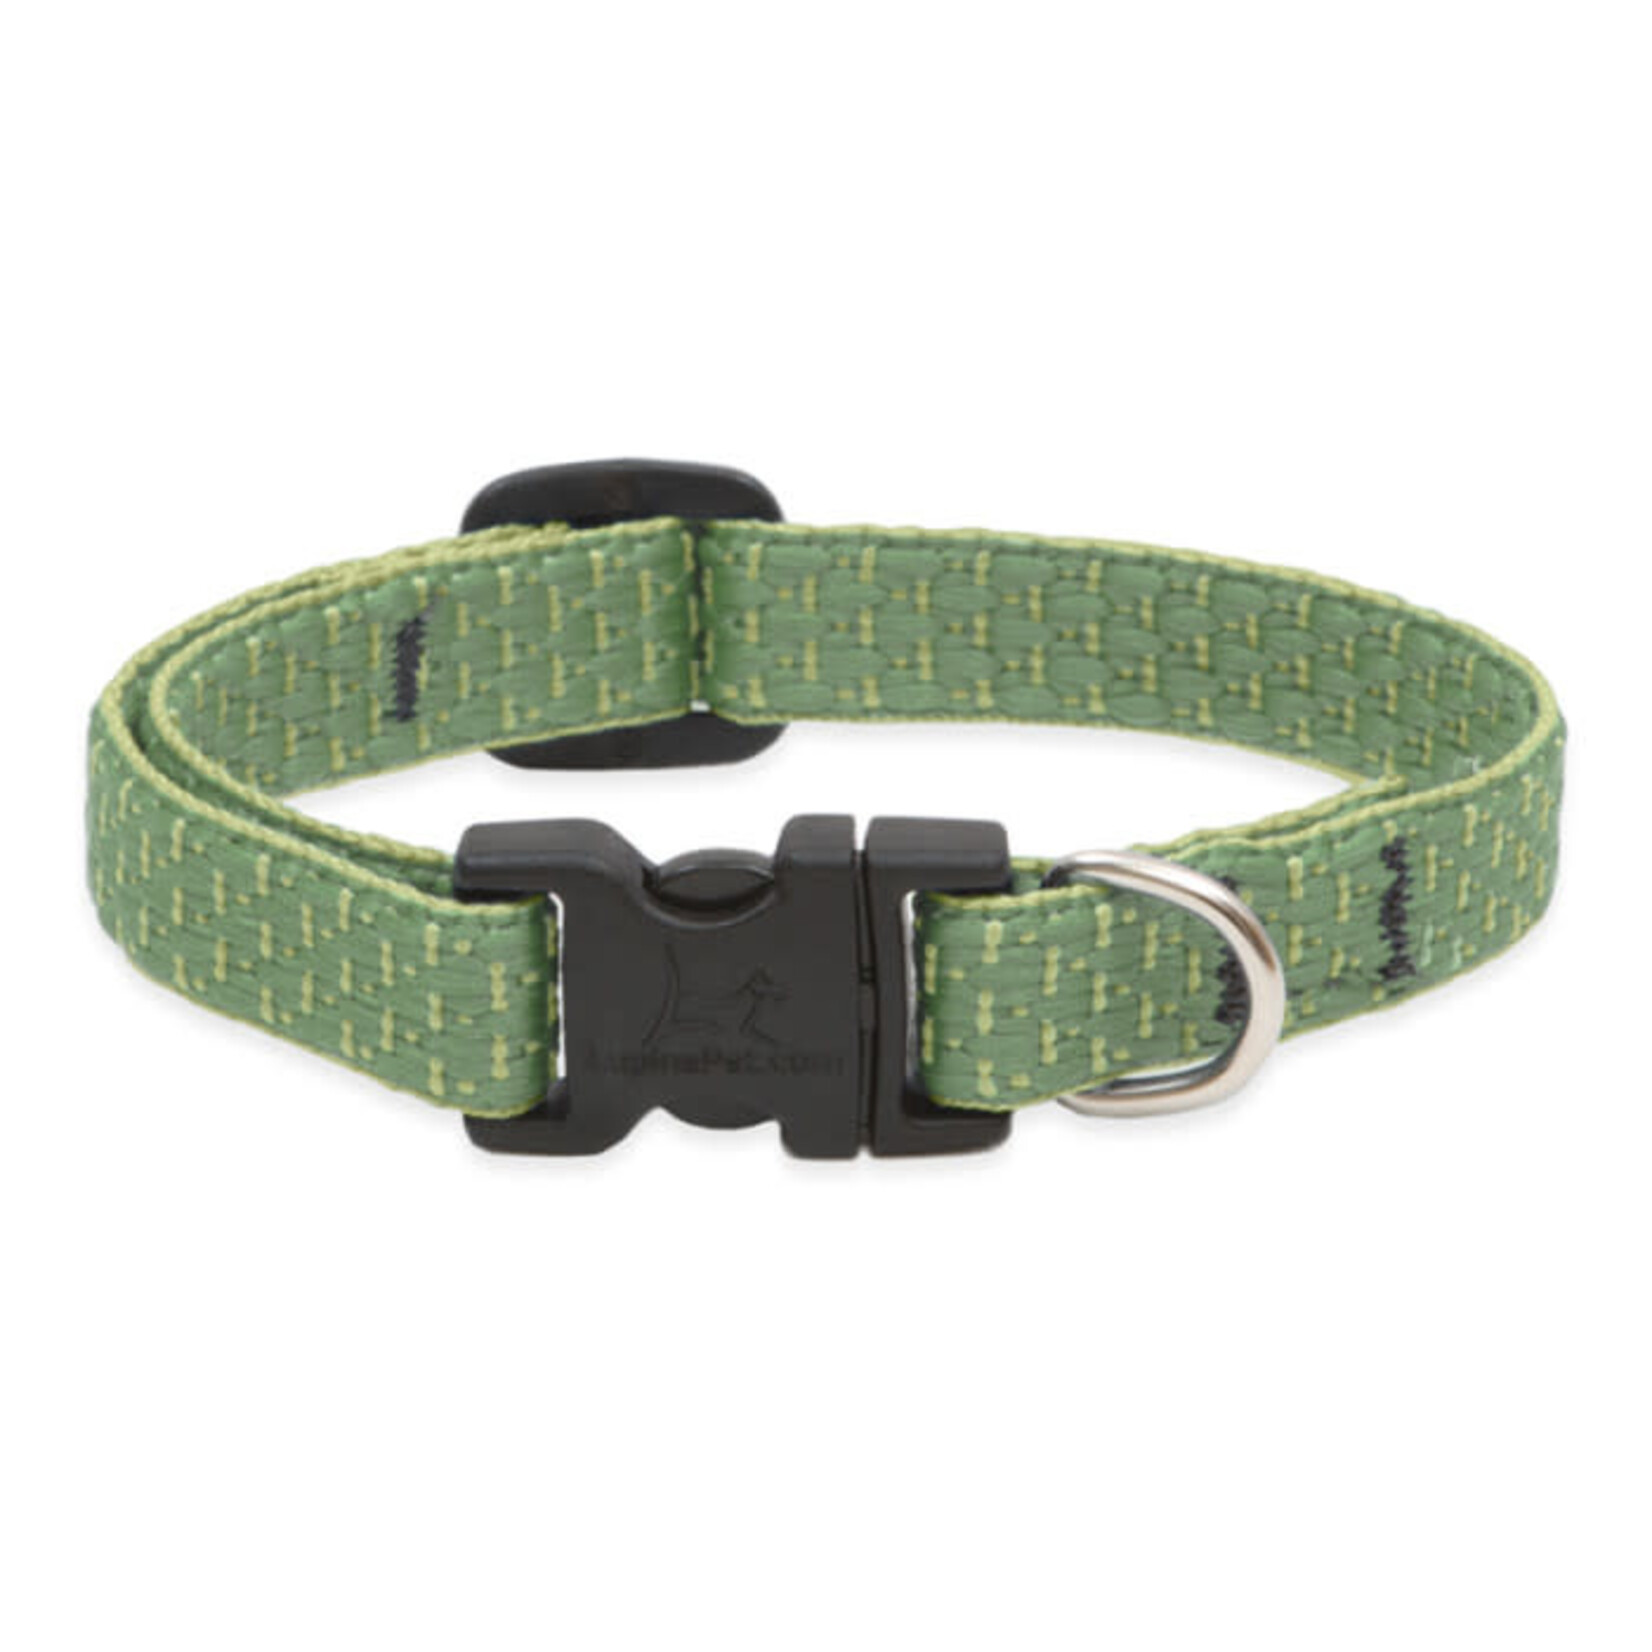 Lupine Lupine Moss 1/2 in x 10-16 in Adjustable Collar